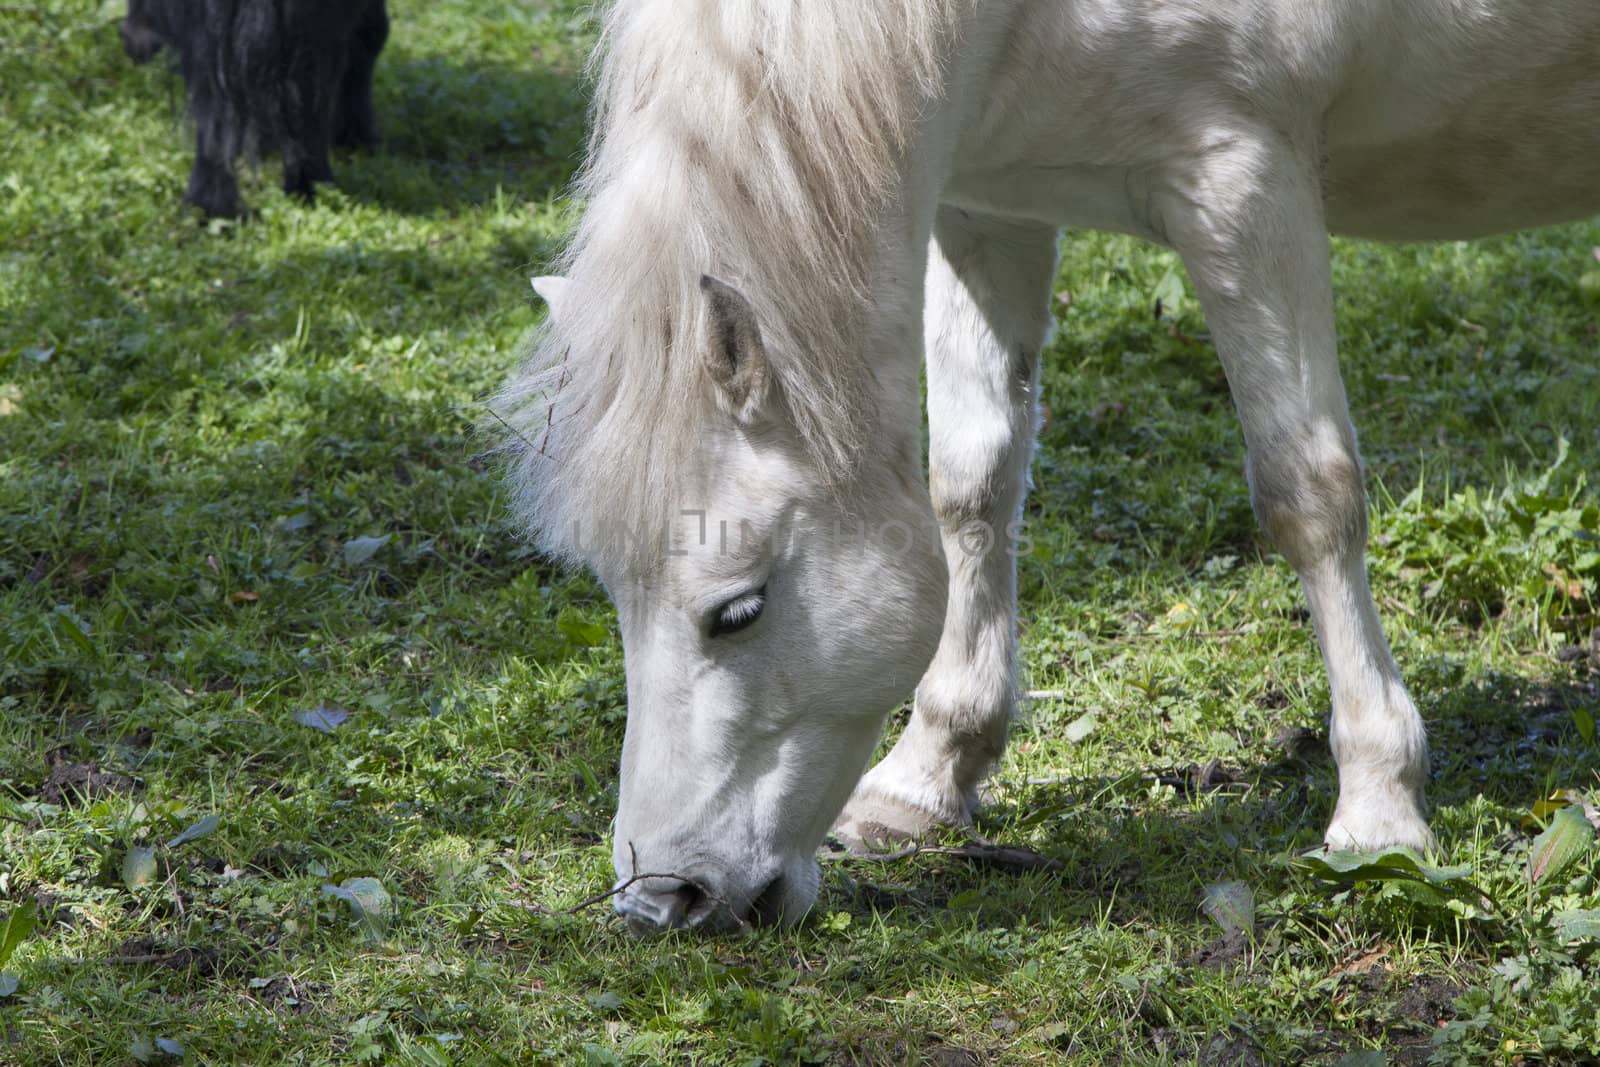 Beautiful White Horse Eating Grass in Scottish Field